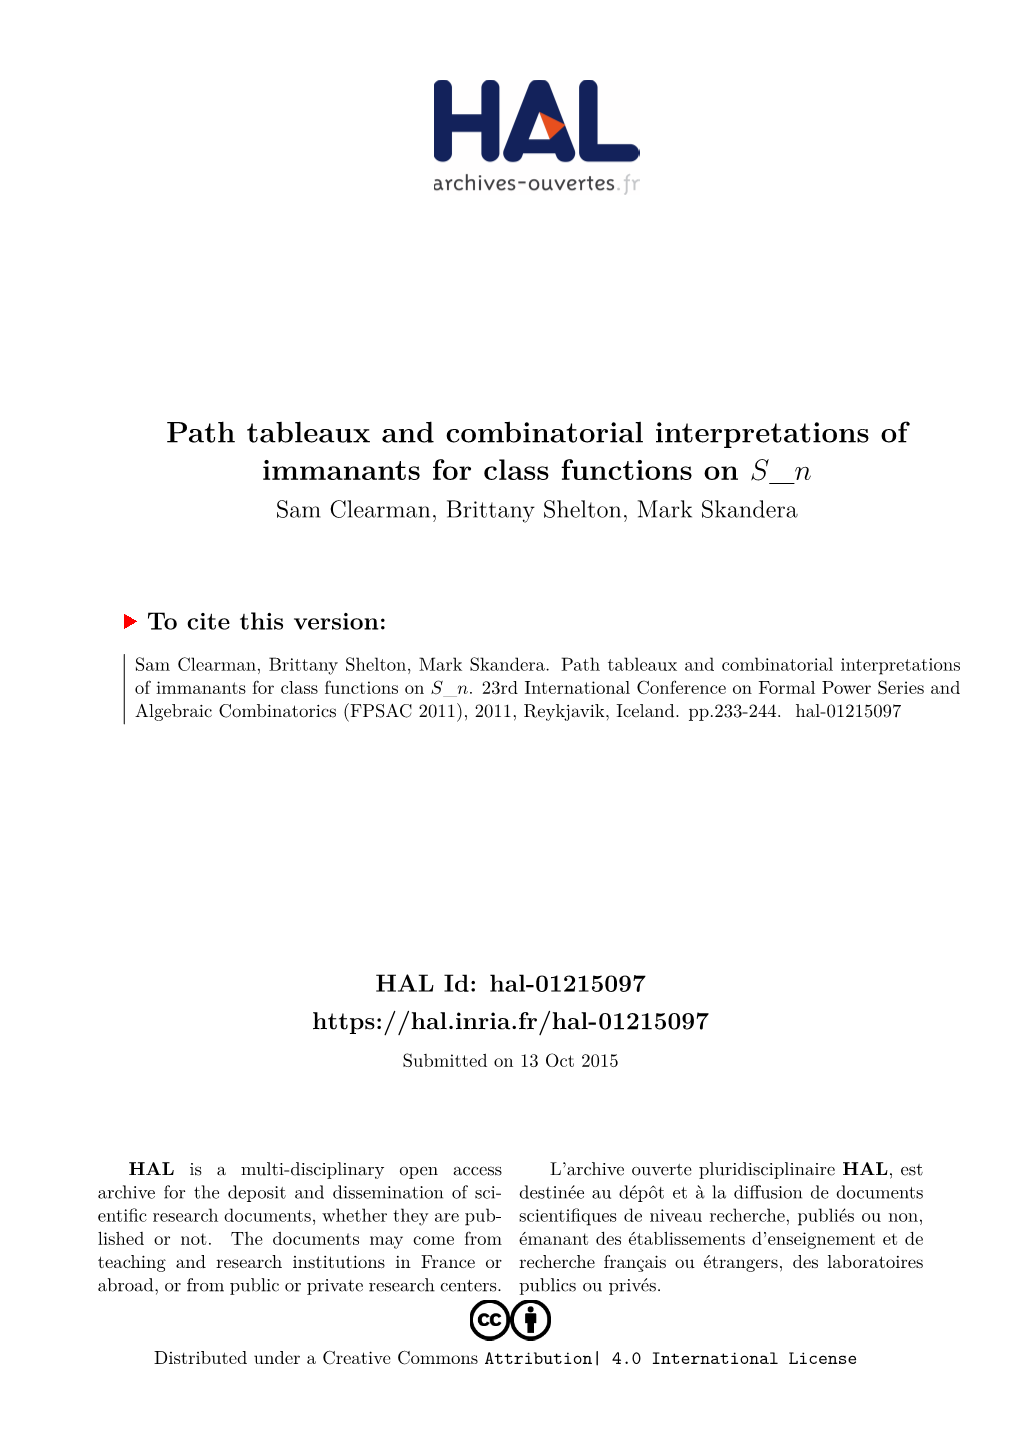 Path Tableaux and Combinatorial Interpretations of Immanants for Class Functions on S N Sam Clearman, Brittany Shelton, Mark Skandera